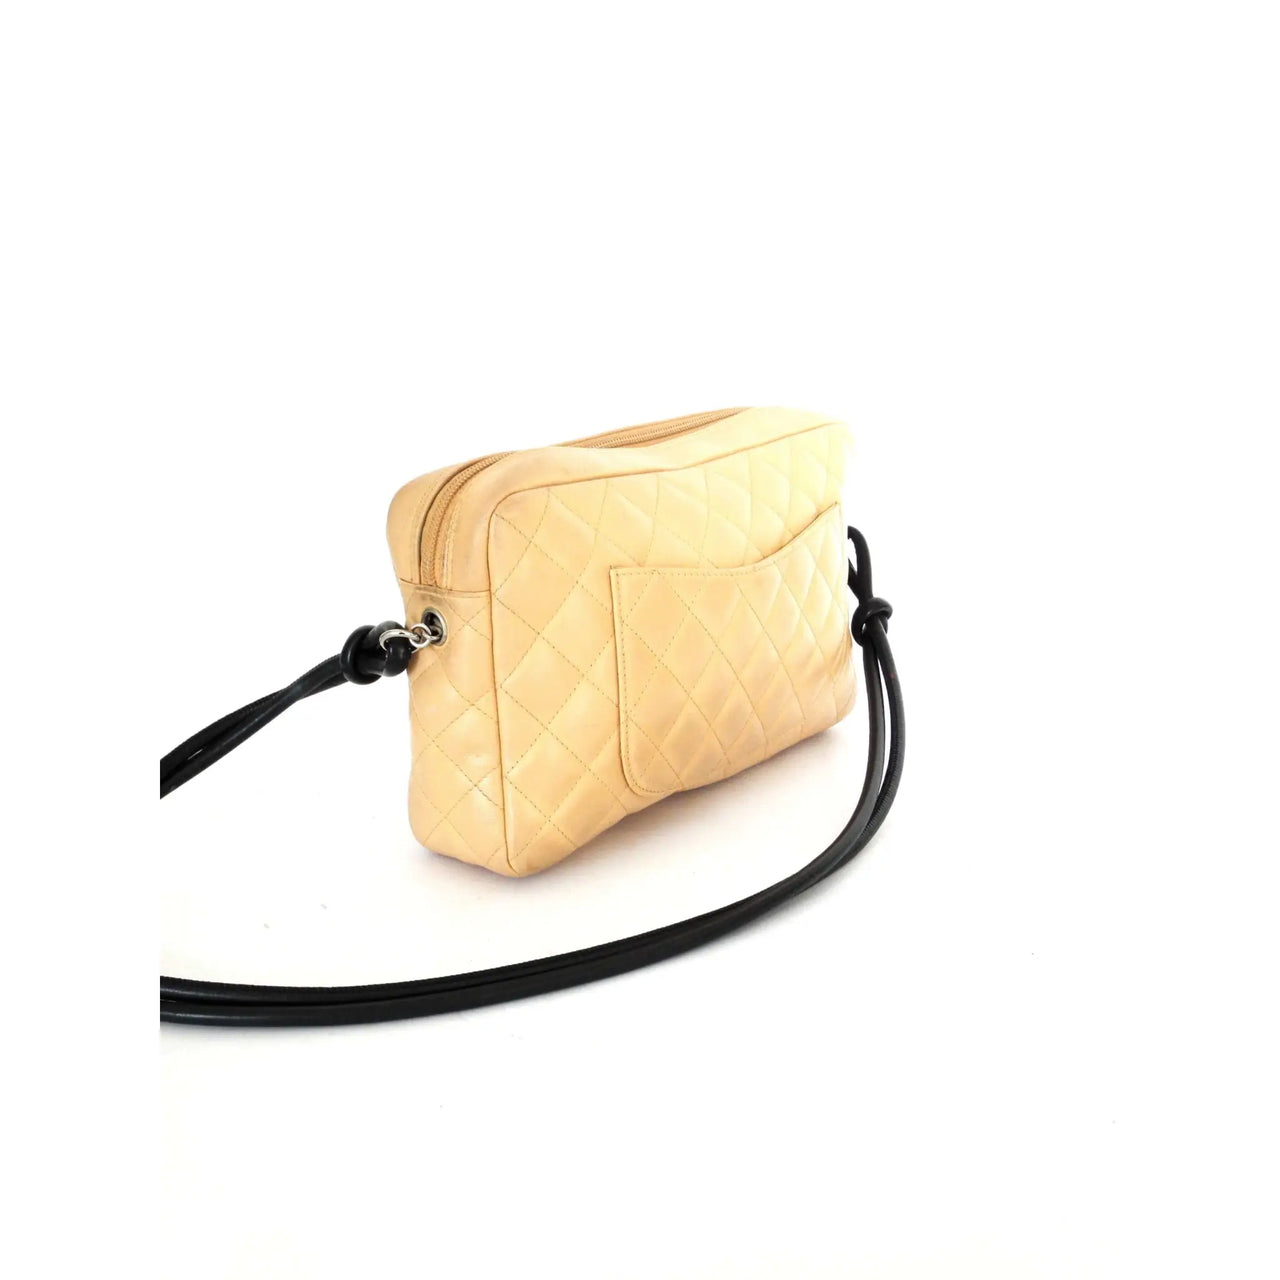 Chanel Beige/Black Quilted Leather Ligne Cambon Pochette at